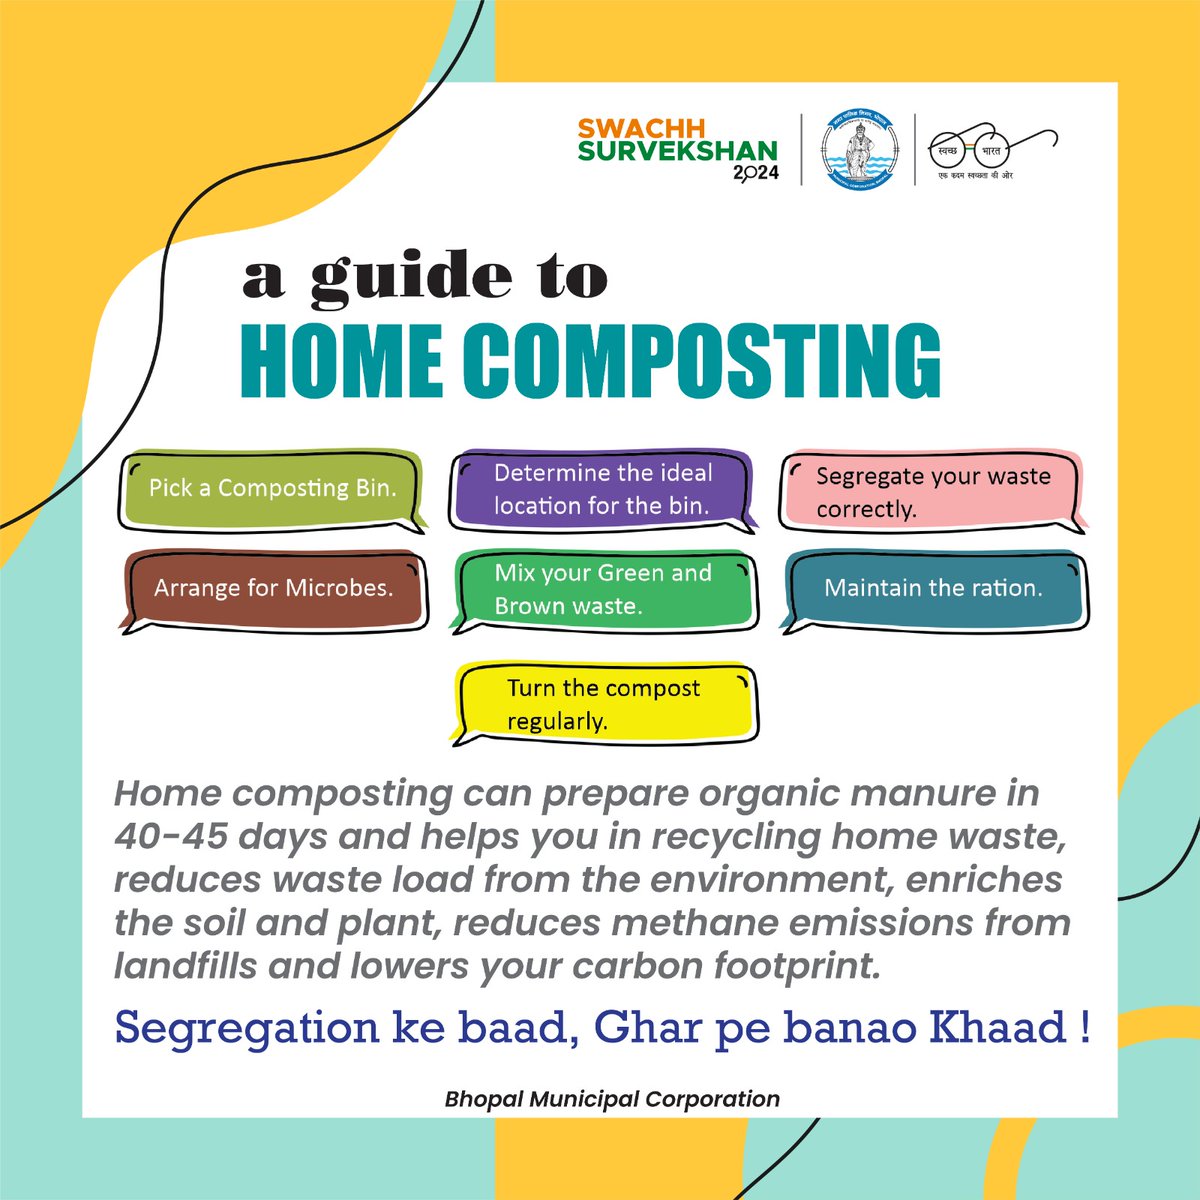 Home Composting ! 
It is a great way to recycle the organic waste we generate at home.

#ULBCode802312
#BMCNews
#Composting
#RRR 
#wastesegregation
#SwachhSurvekshan2024Bhopal
#swachhbhopal